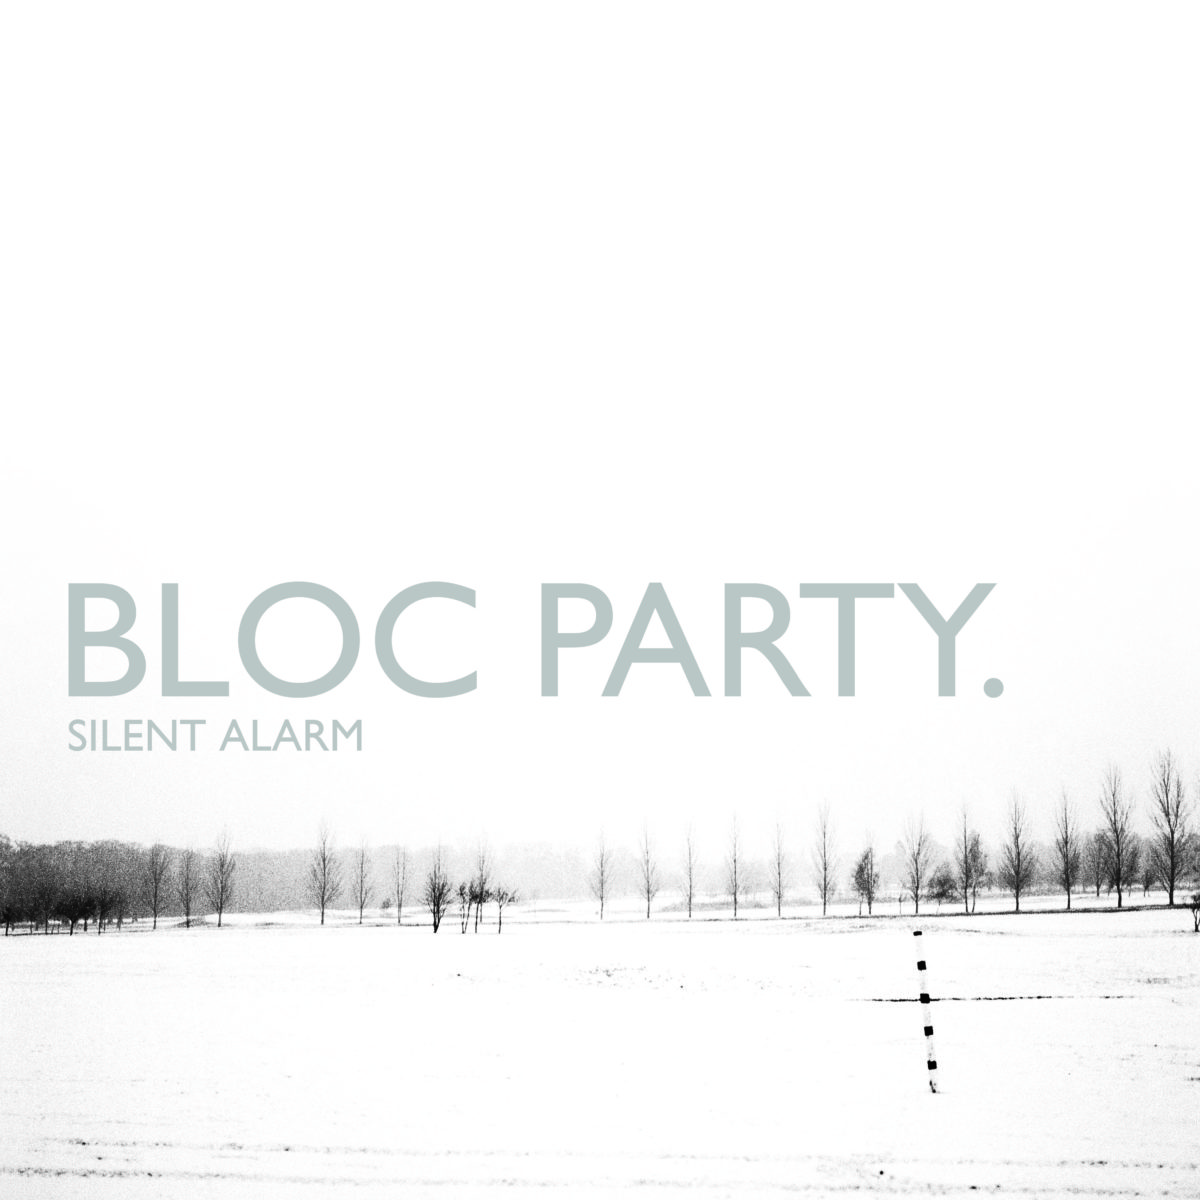 Bloc Party to play 'Silent Alarm' in full